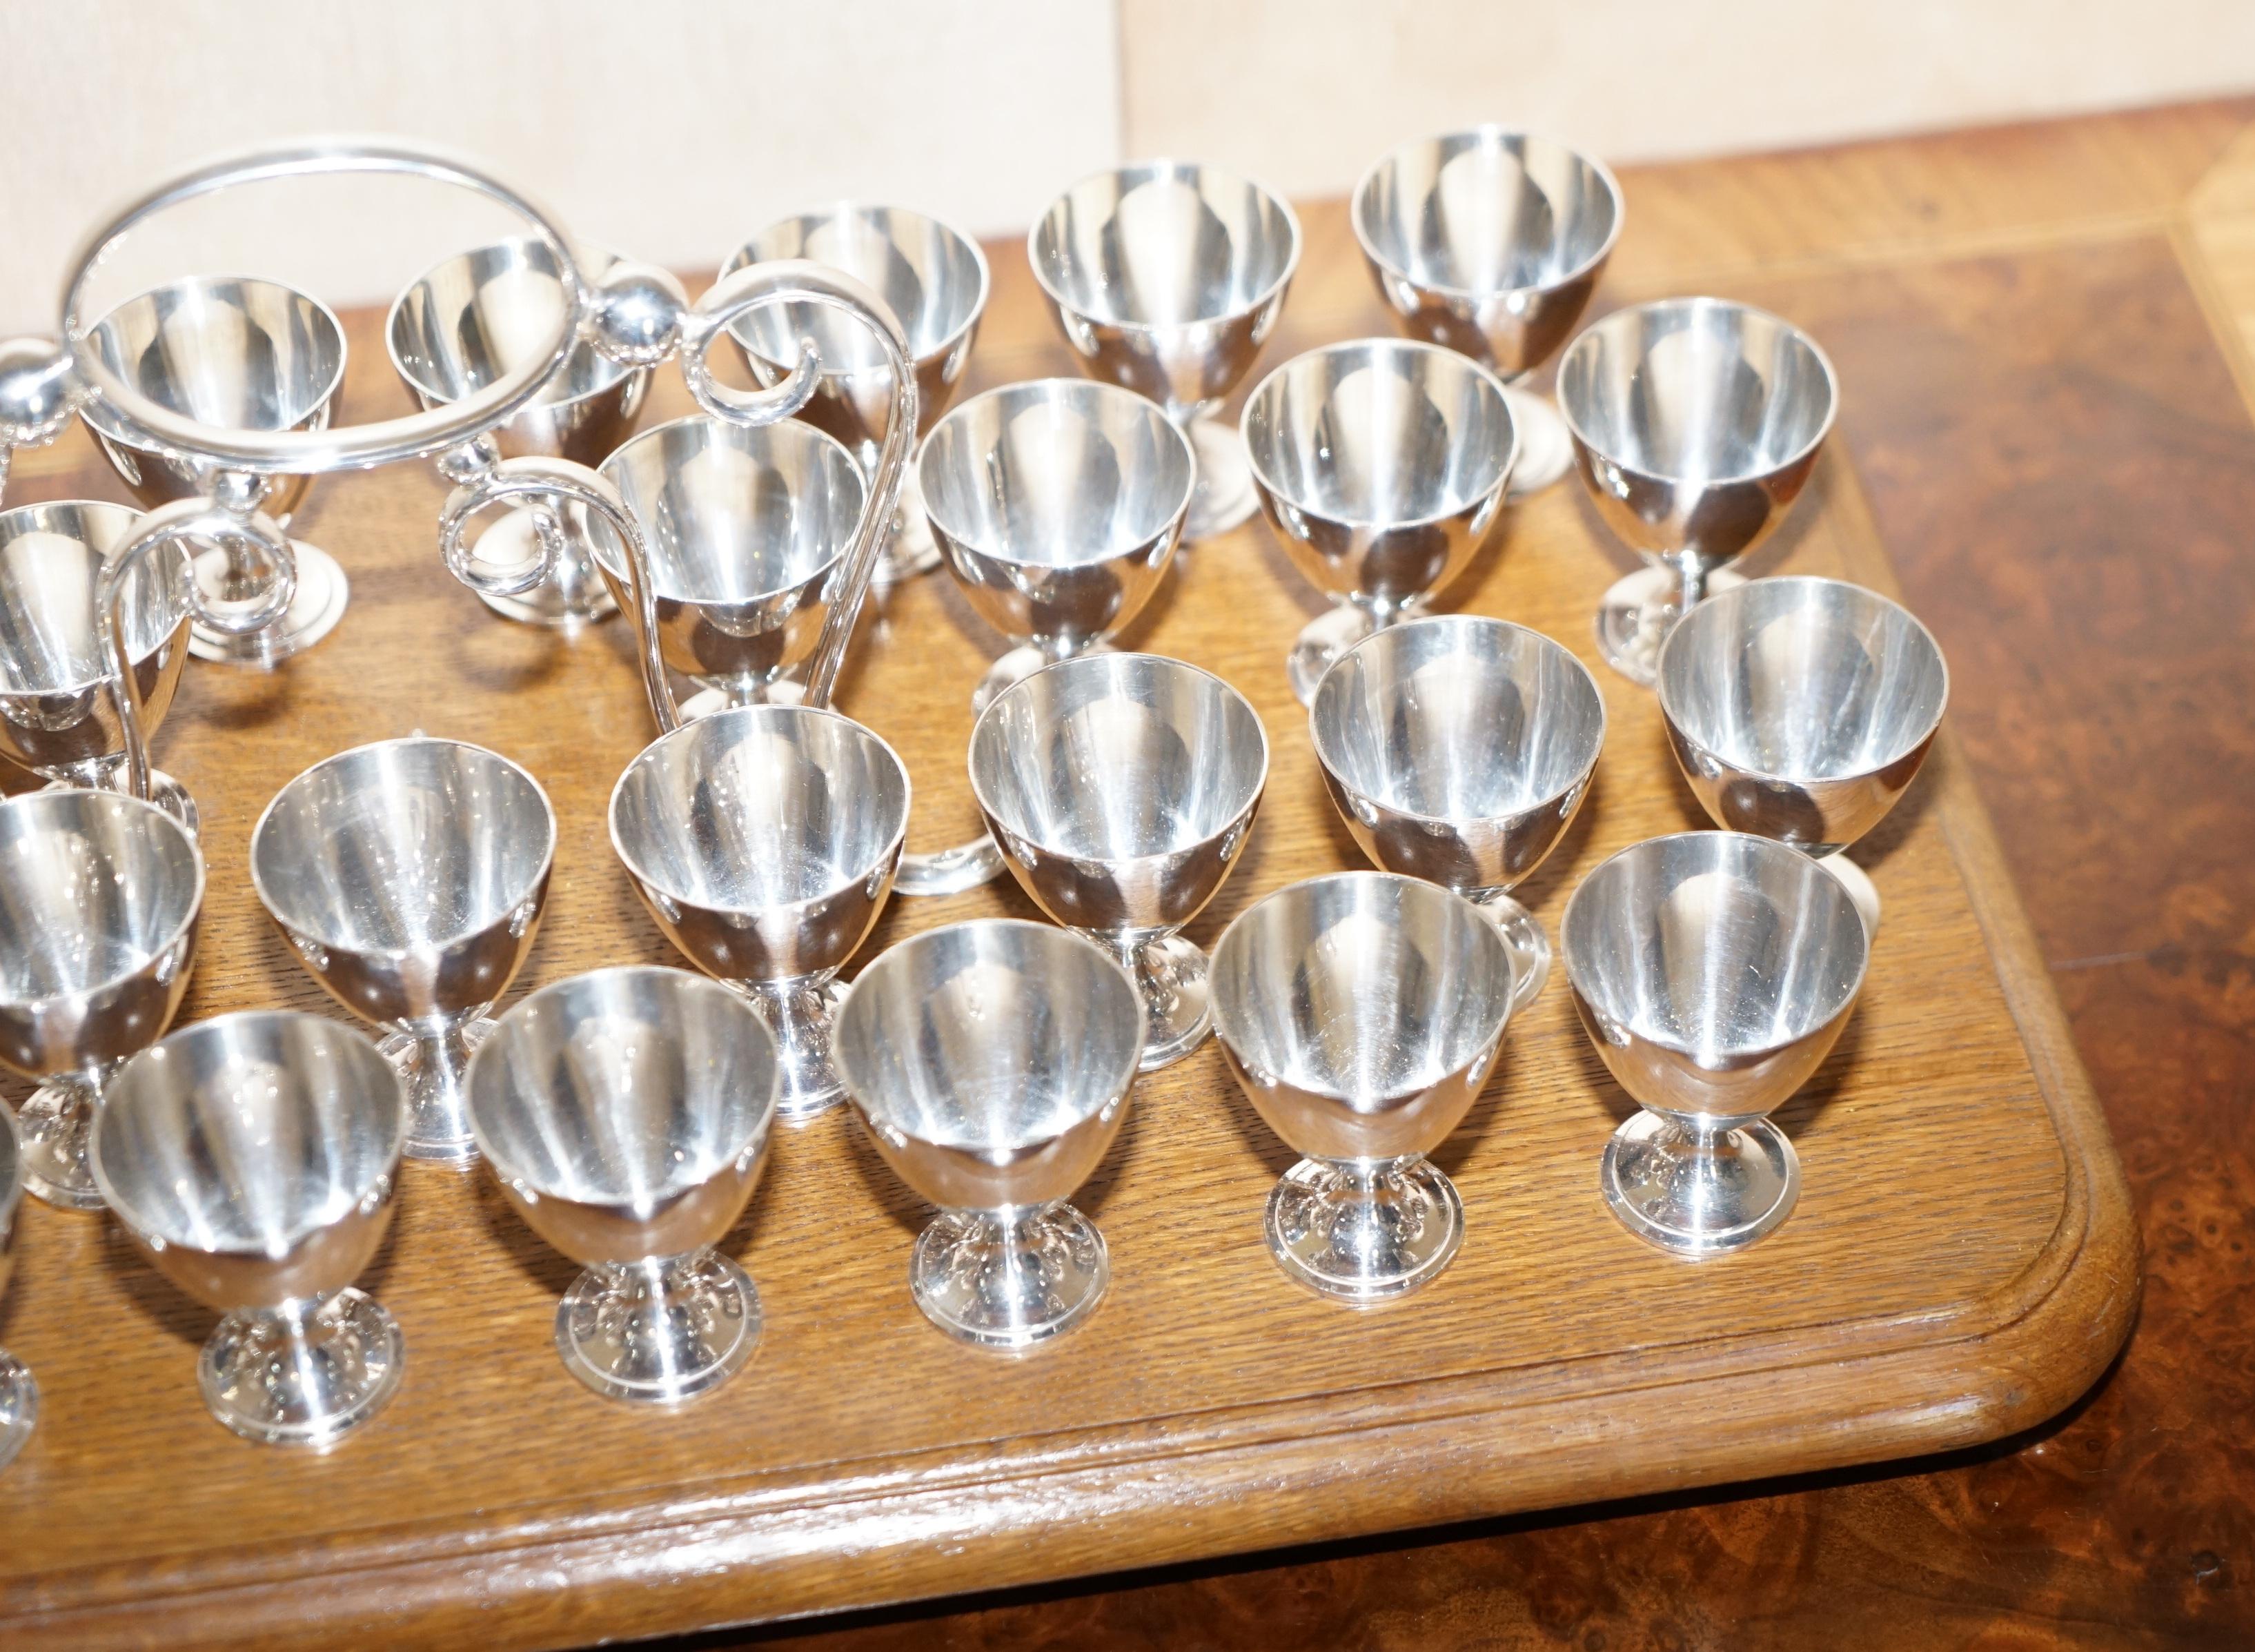 English Antique Tray with 33 EPNS Shot Cups / Glasses on Originally for Communions For Sale